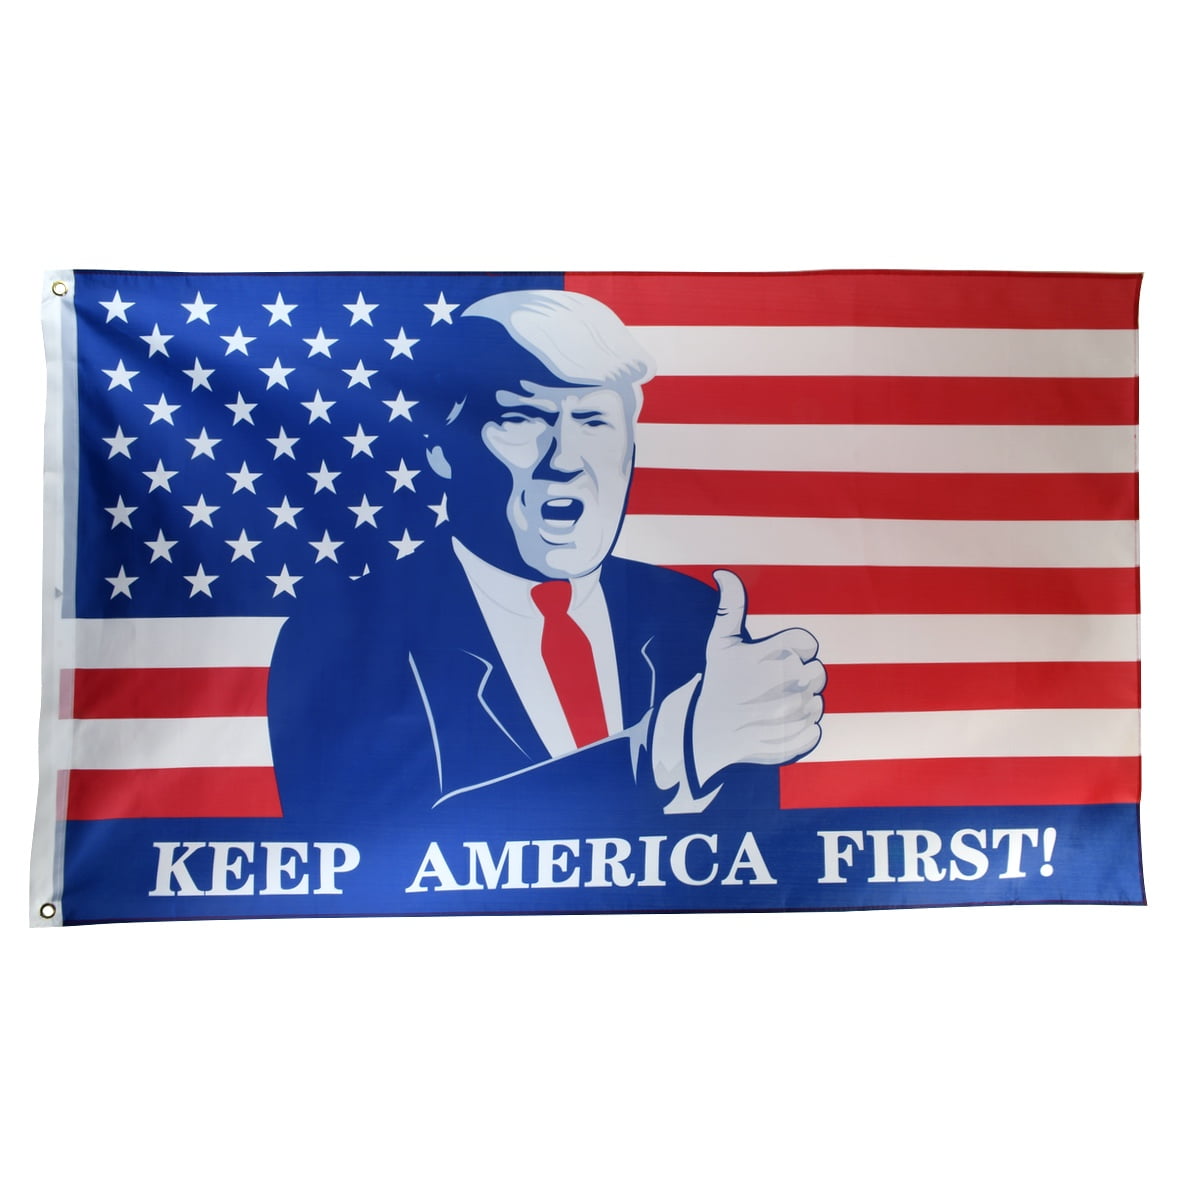 3 Red Trump 2020 Face Cover Make America Great Again Patriotic NEW Free shipping 